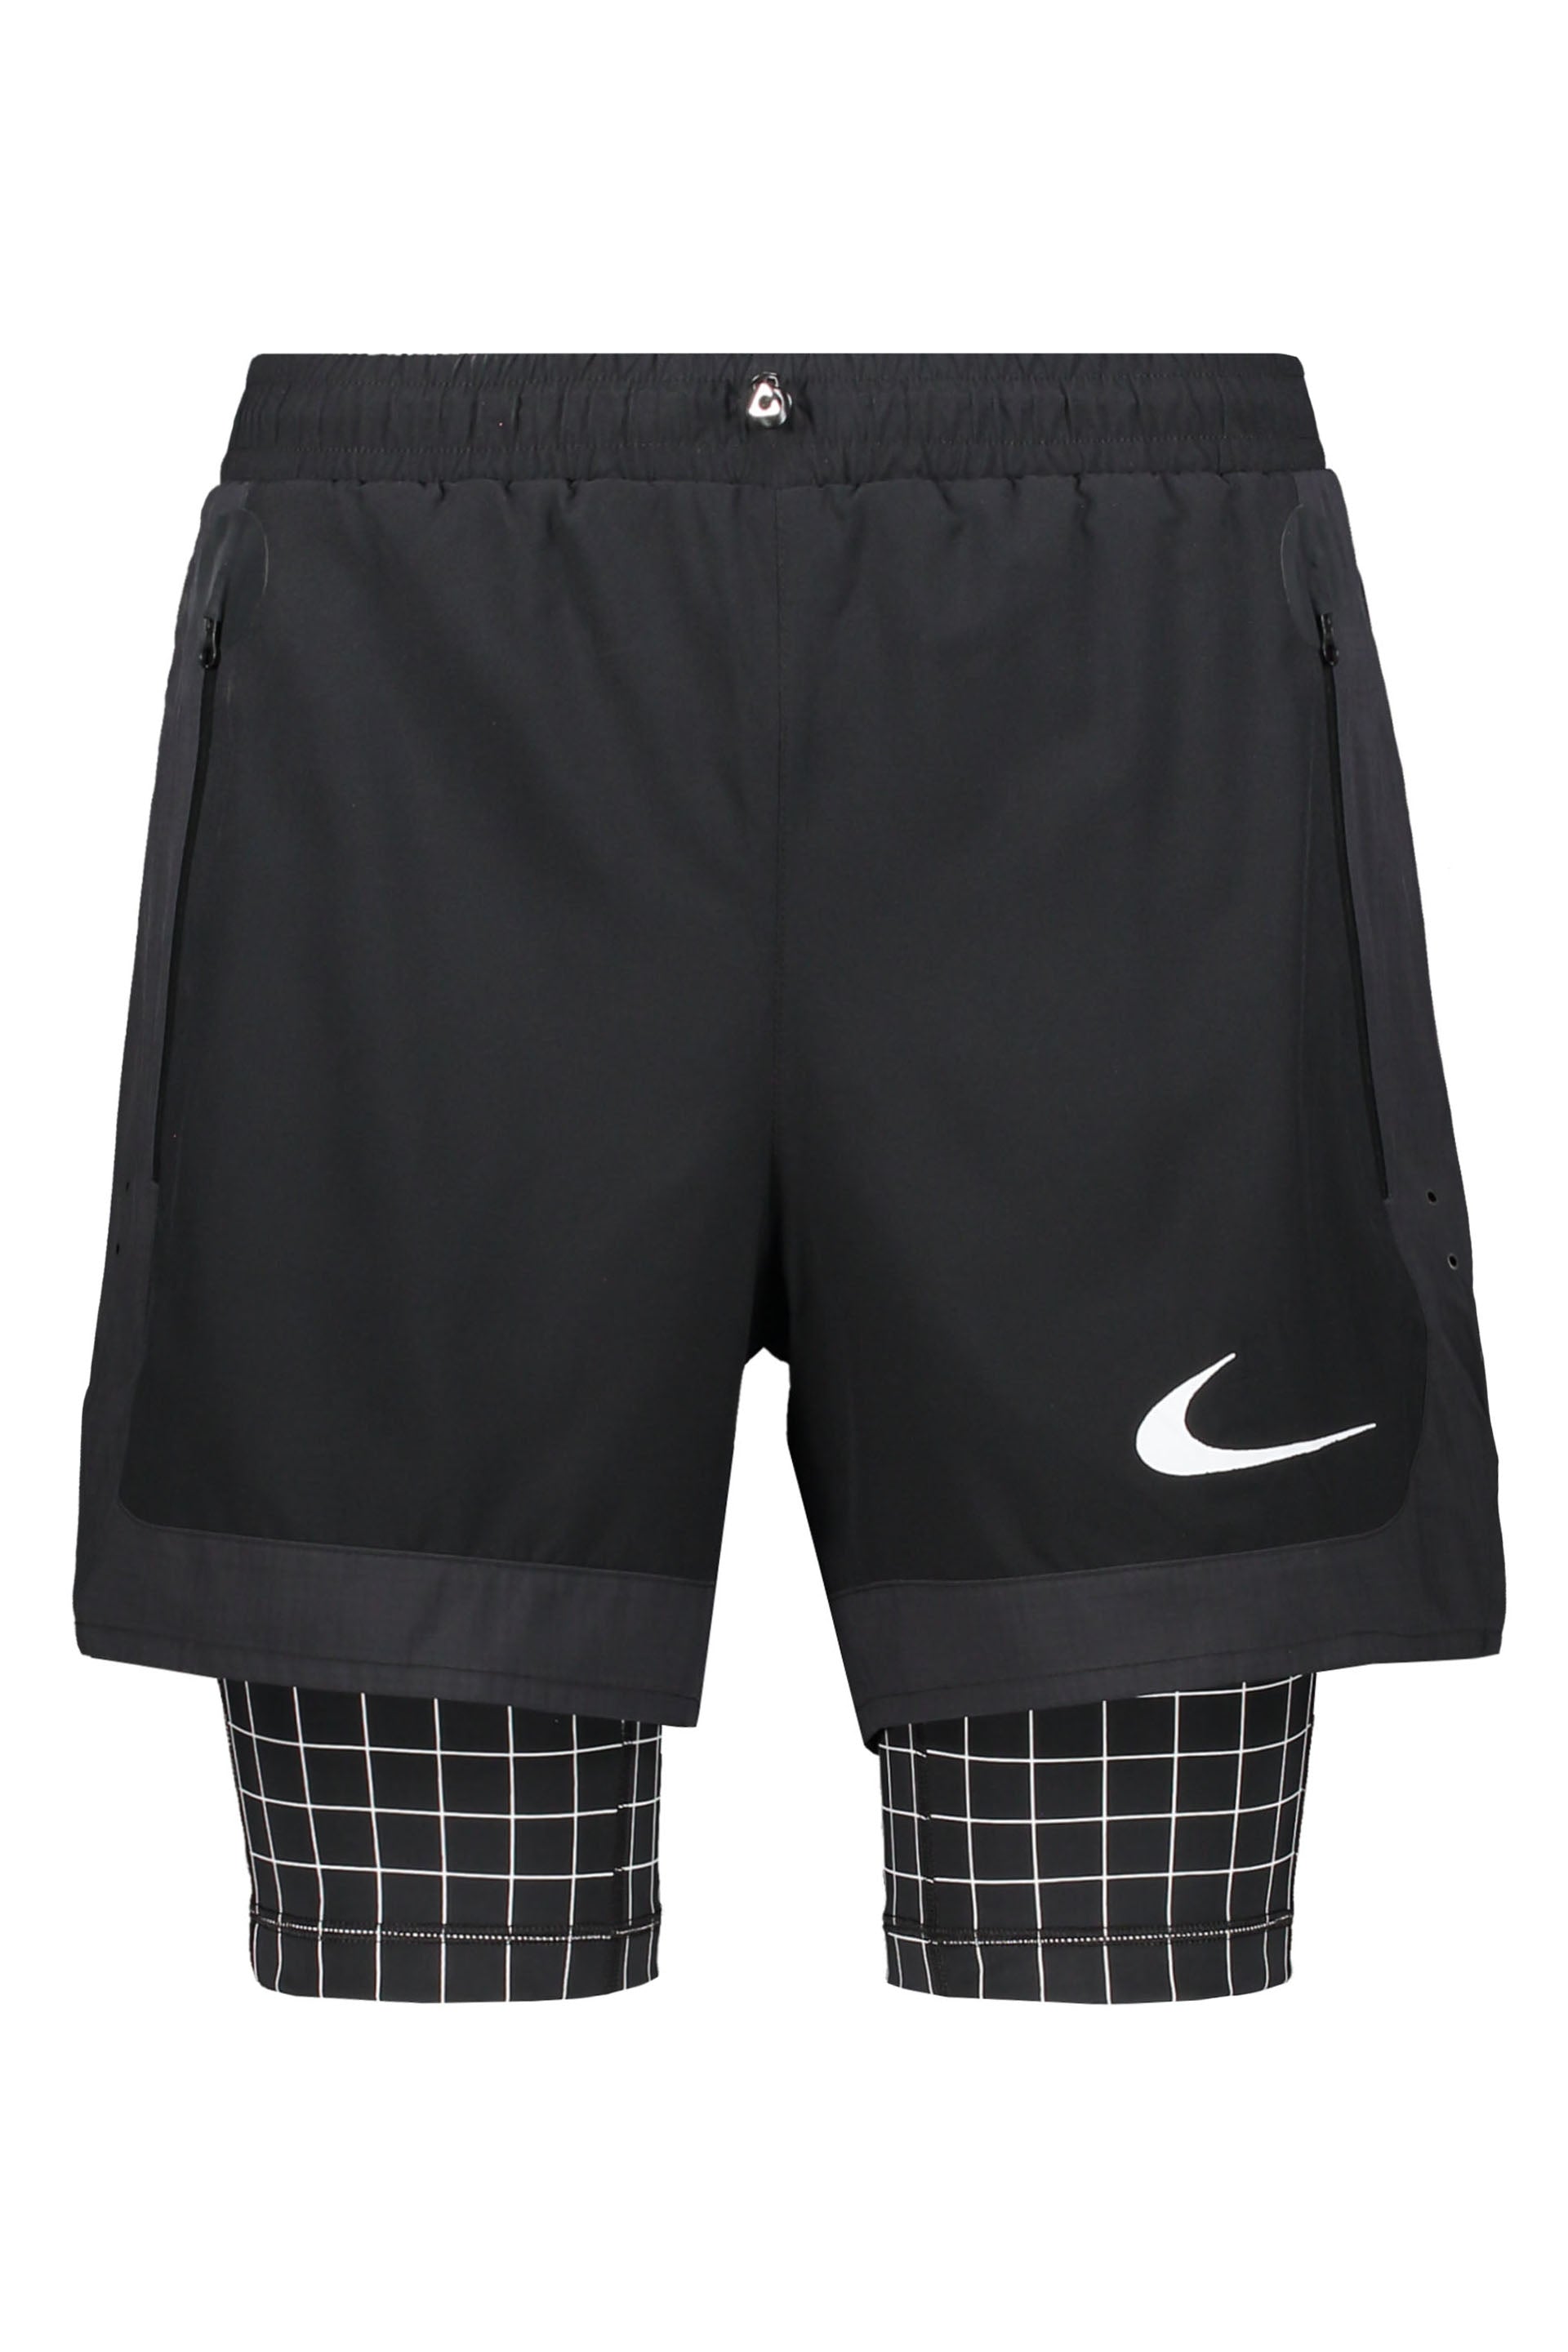 Off-White-OUTLET-SALE-Nike-x-Off-White-Nylon-bermuda-shorts-Hosen-L-ARCHIVE-COLLECTION_914968f1-37cd-44fa-8343-5625c76a44ab.jpg